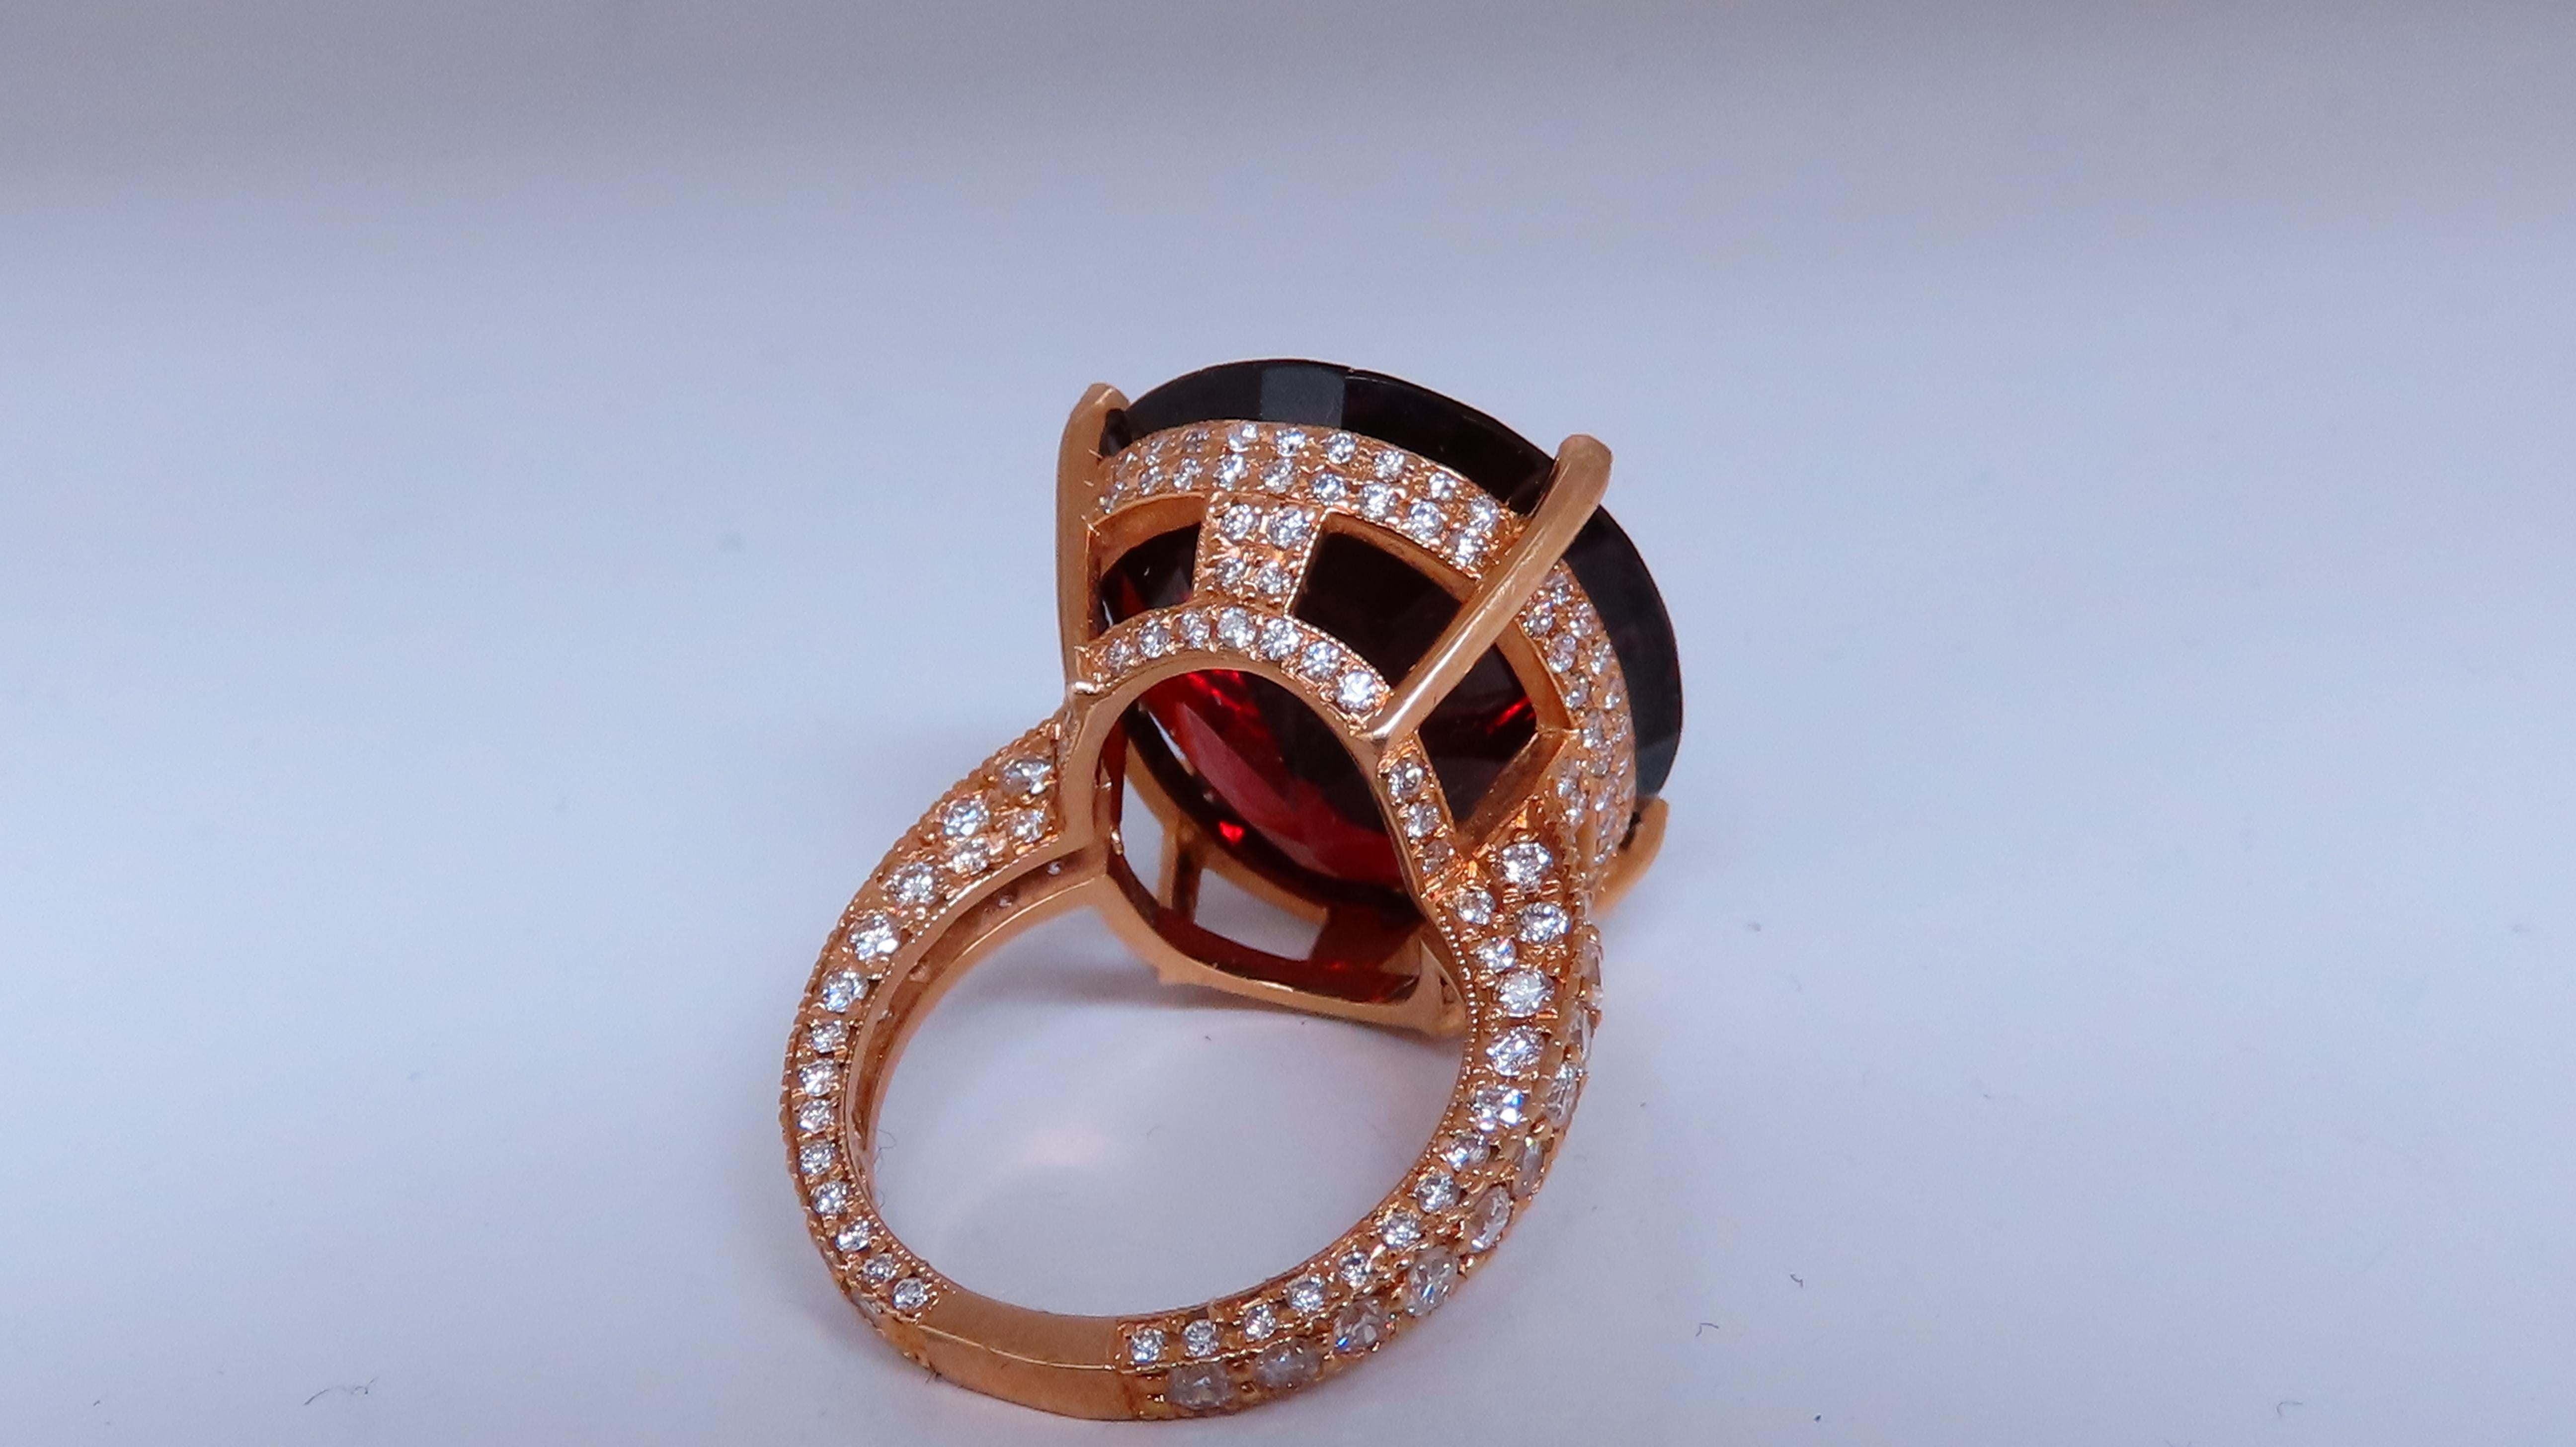 Natural 35.75 Carat Vivid Red Spessartite Diamond Ring Encrusted In New Condition For Sale In New York, NY